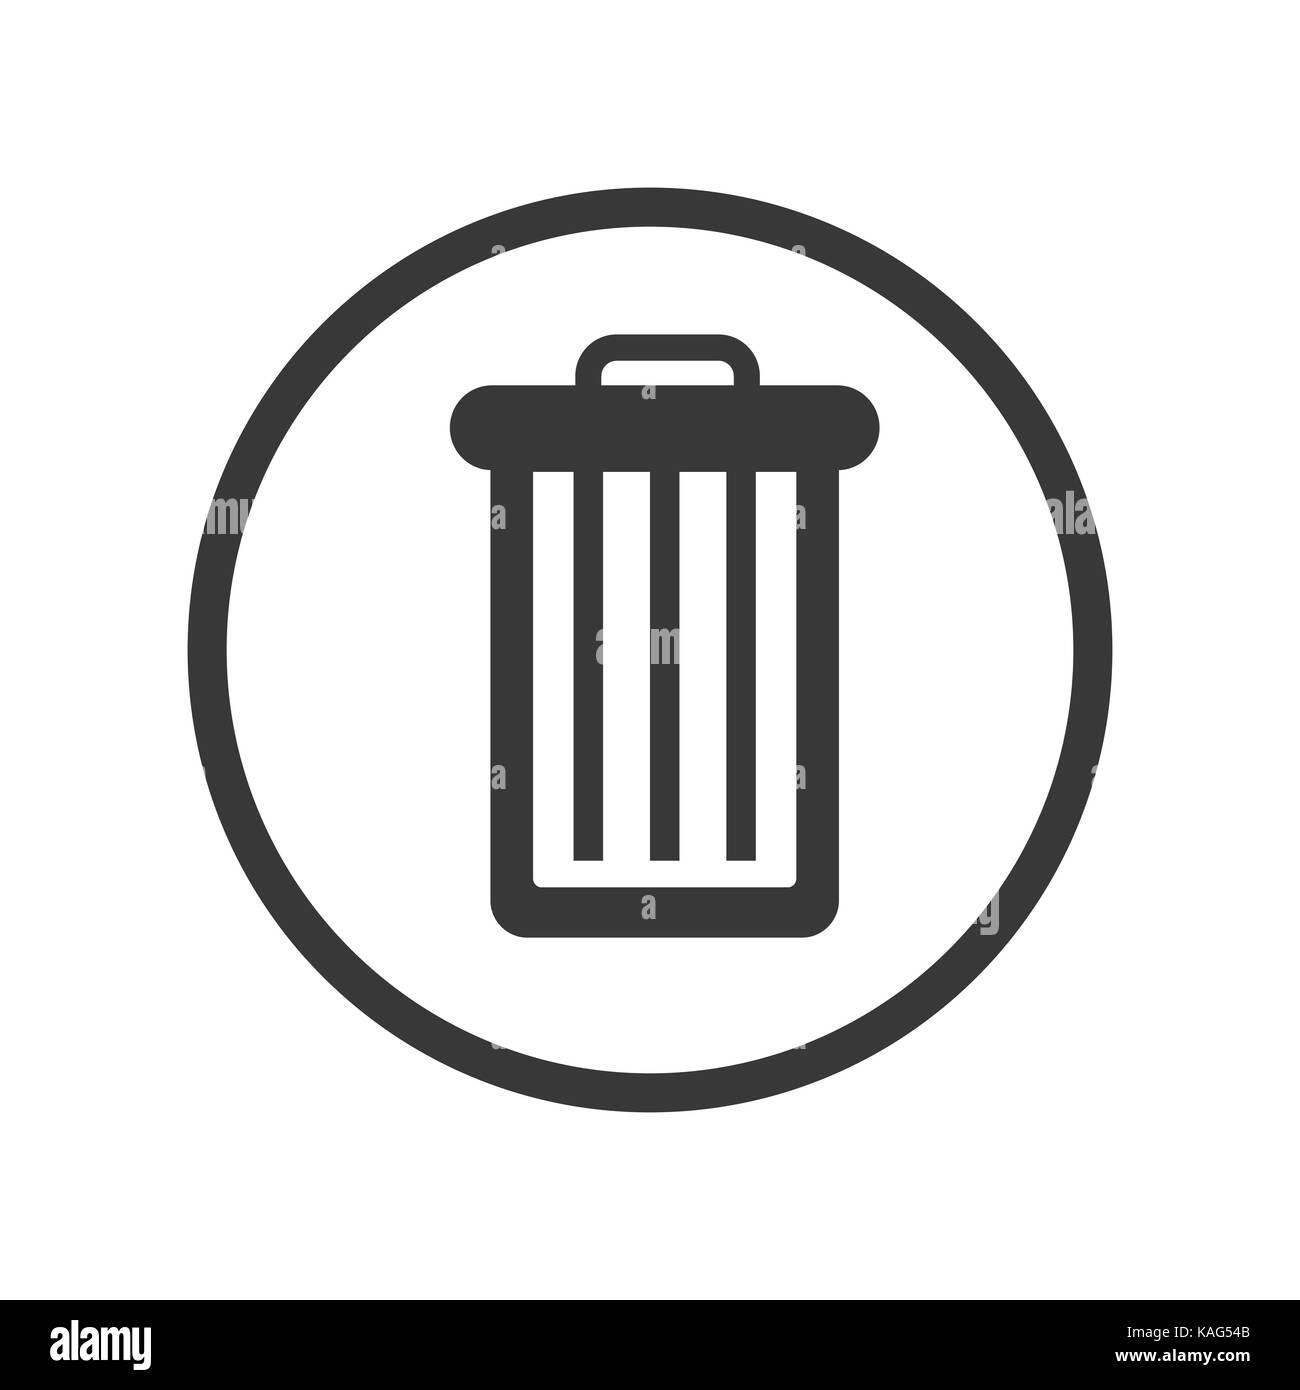 Trash bin icon, iconic symbol inside a circle, on white background.  Vector Iconic Design. Stock Vector